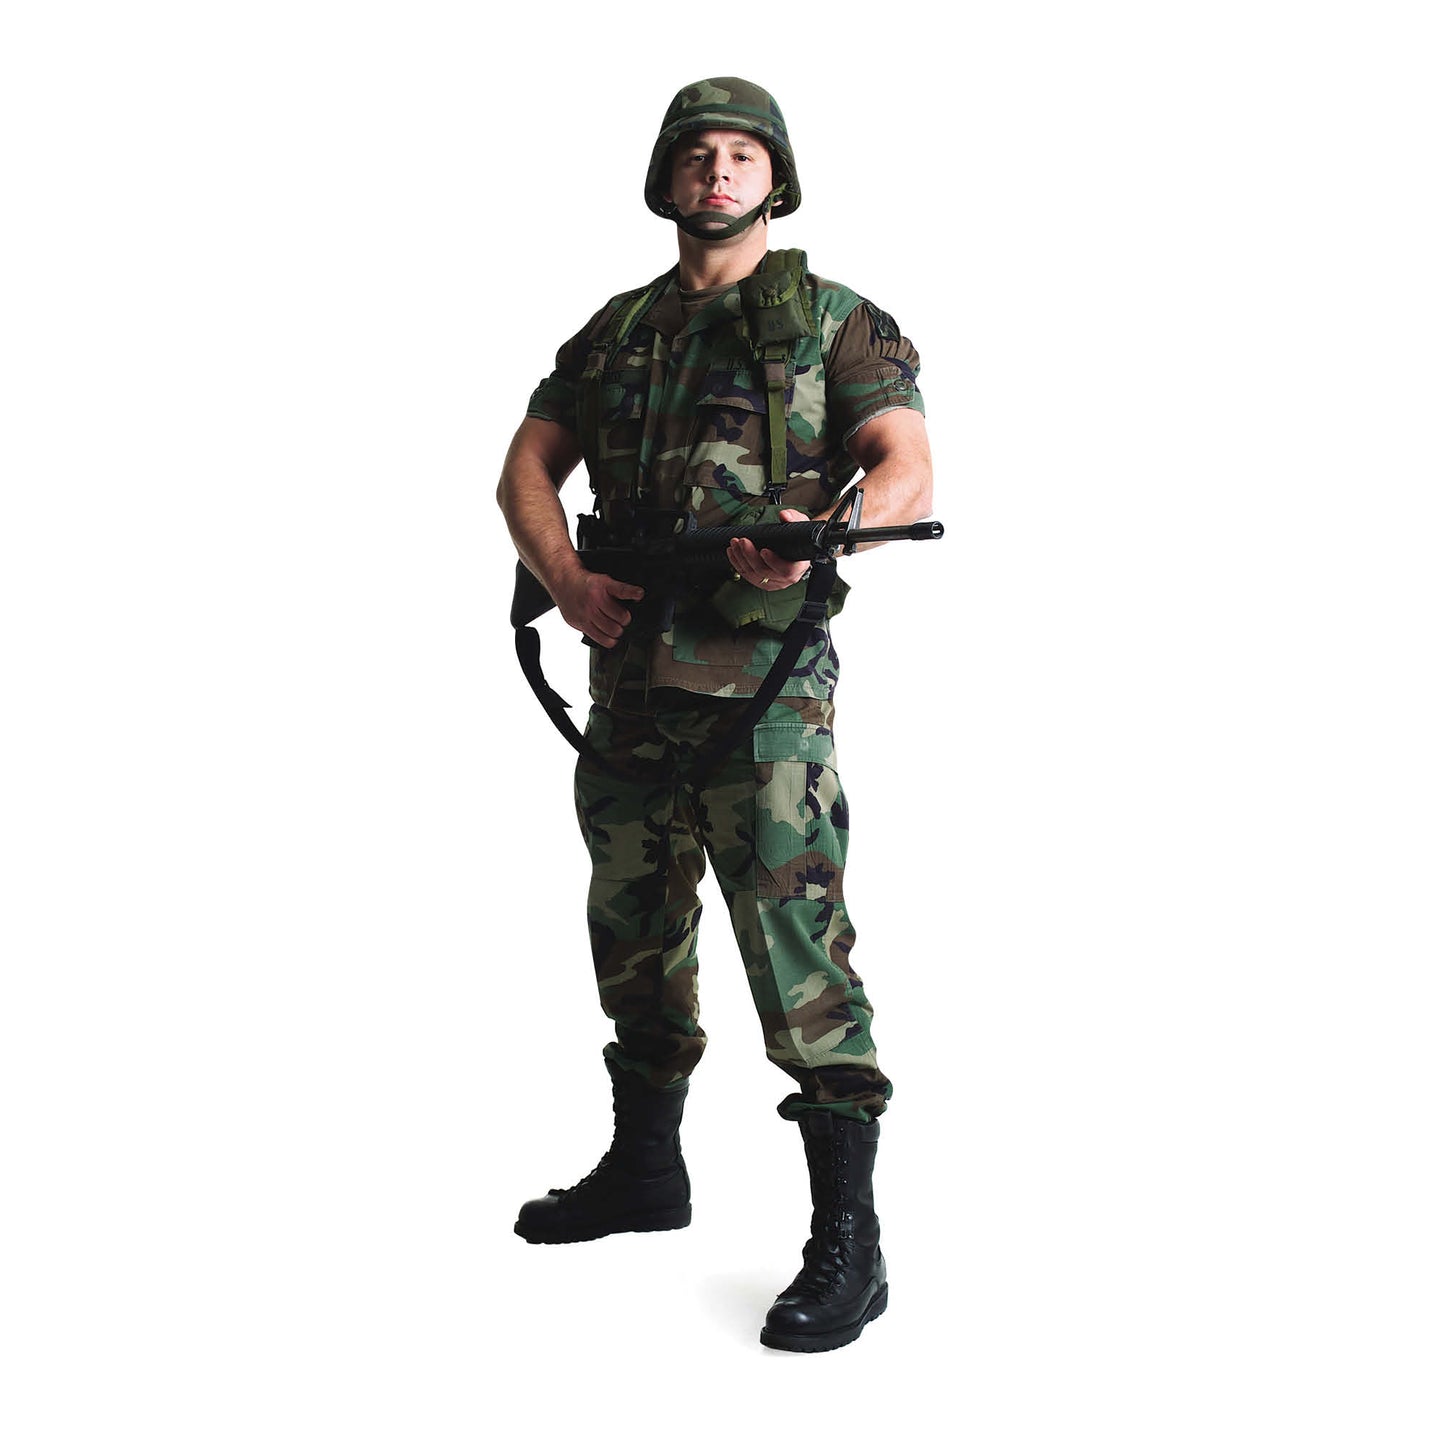 SC388 US Soldier Cardboard Cut Out Height 183cm